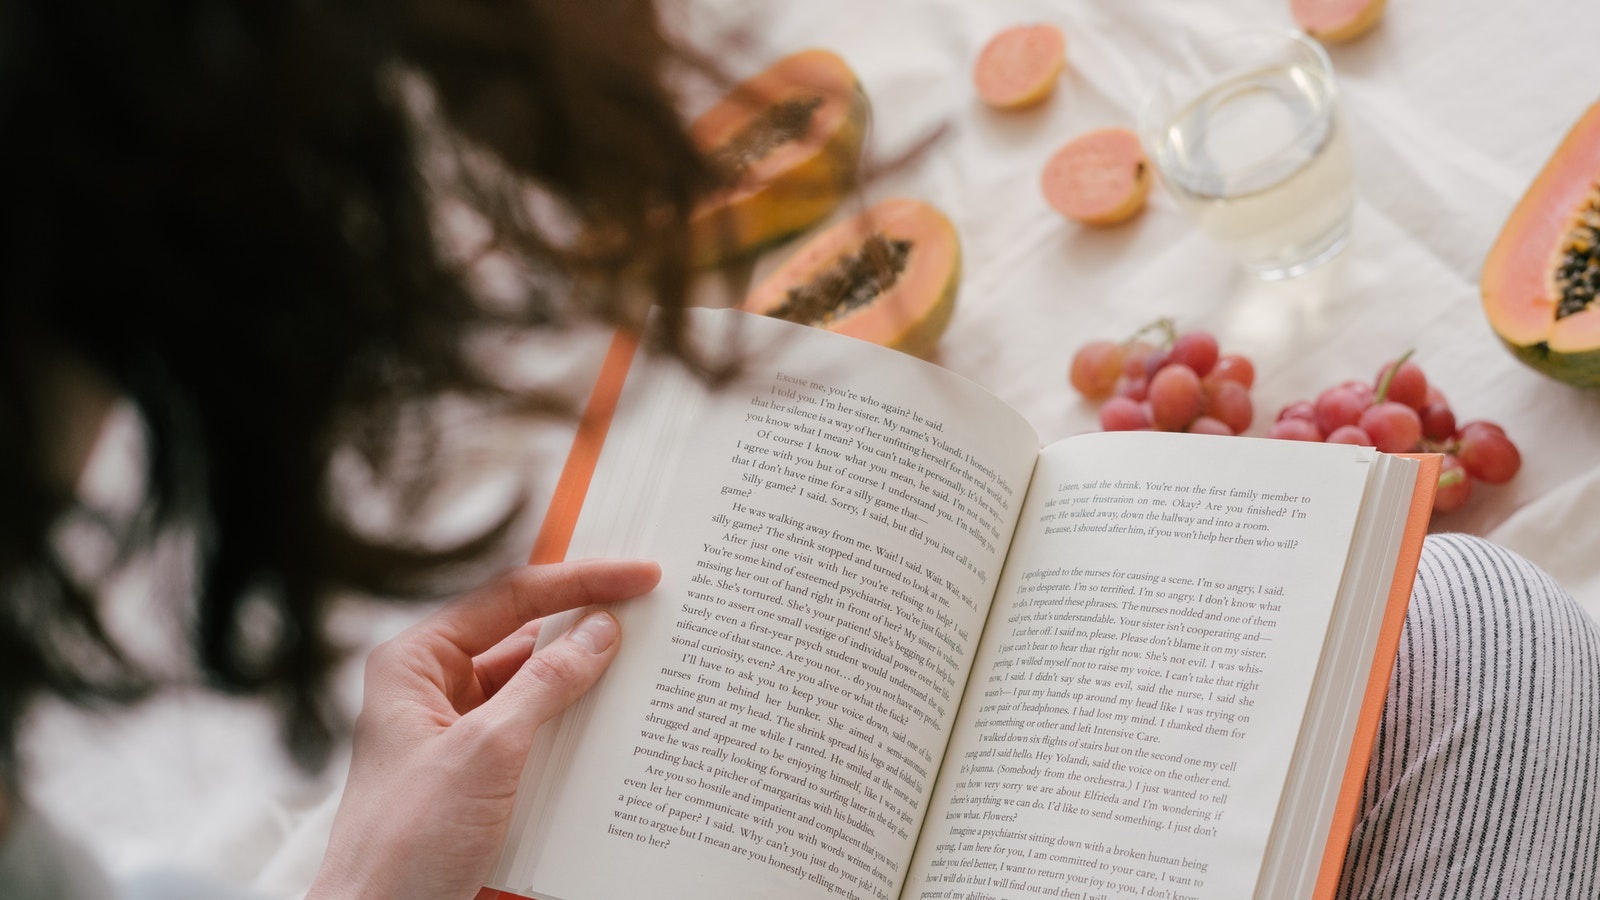 What We’re Reading: 7 Best Health & Wellness Books in 2021